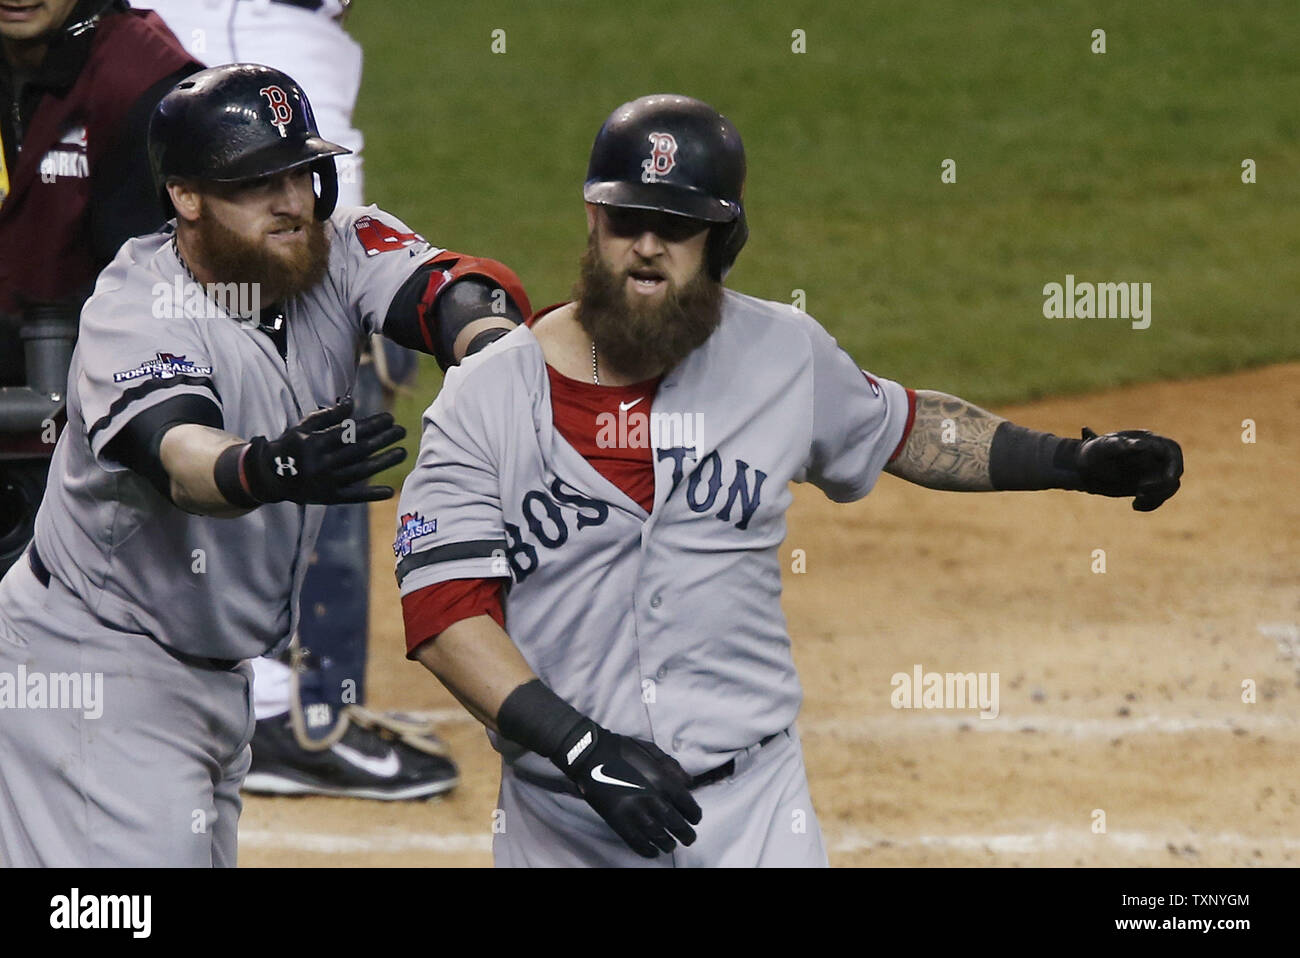 Boston Red Sox's Jonny Gomes (L) congratulates Mike Napoli after Napoli hit a solo home run during the second inning of Game 5 of the American League Championship Series against the Detroit Tigers at Comerica Park in Detroit on October 17, 2013. The Red Sox defeated the Tigers 4-3 and lead the best of seven series 3-2.     UPI/Rebecca Cook Stock Photo